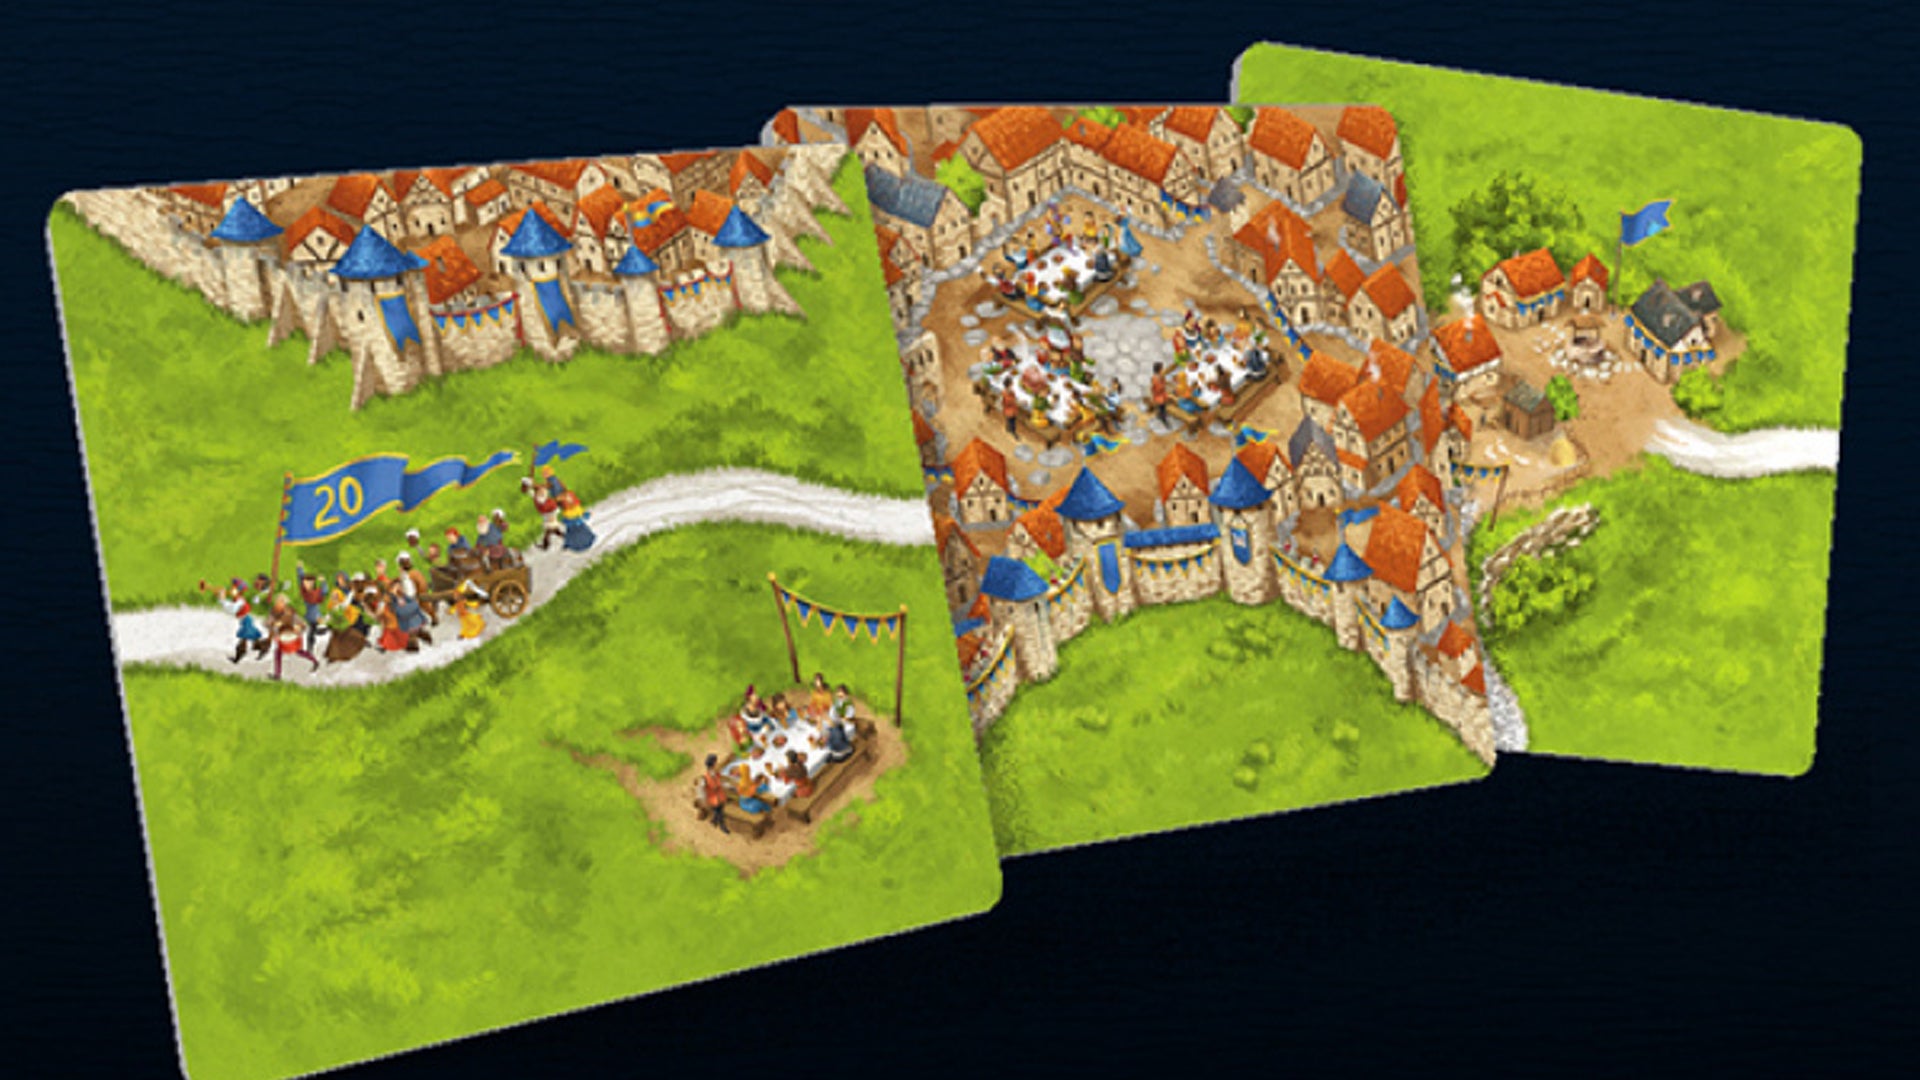 Carcassonne's 20th anniversary edition lets you customise the board game's meeples | Dicebreaker